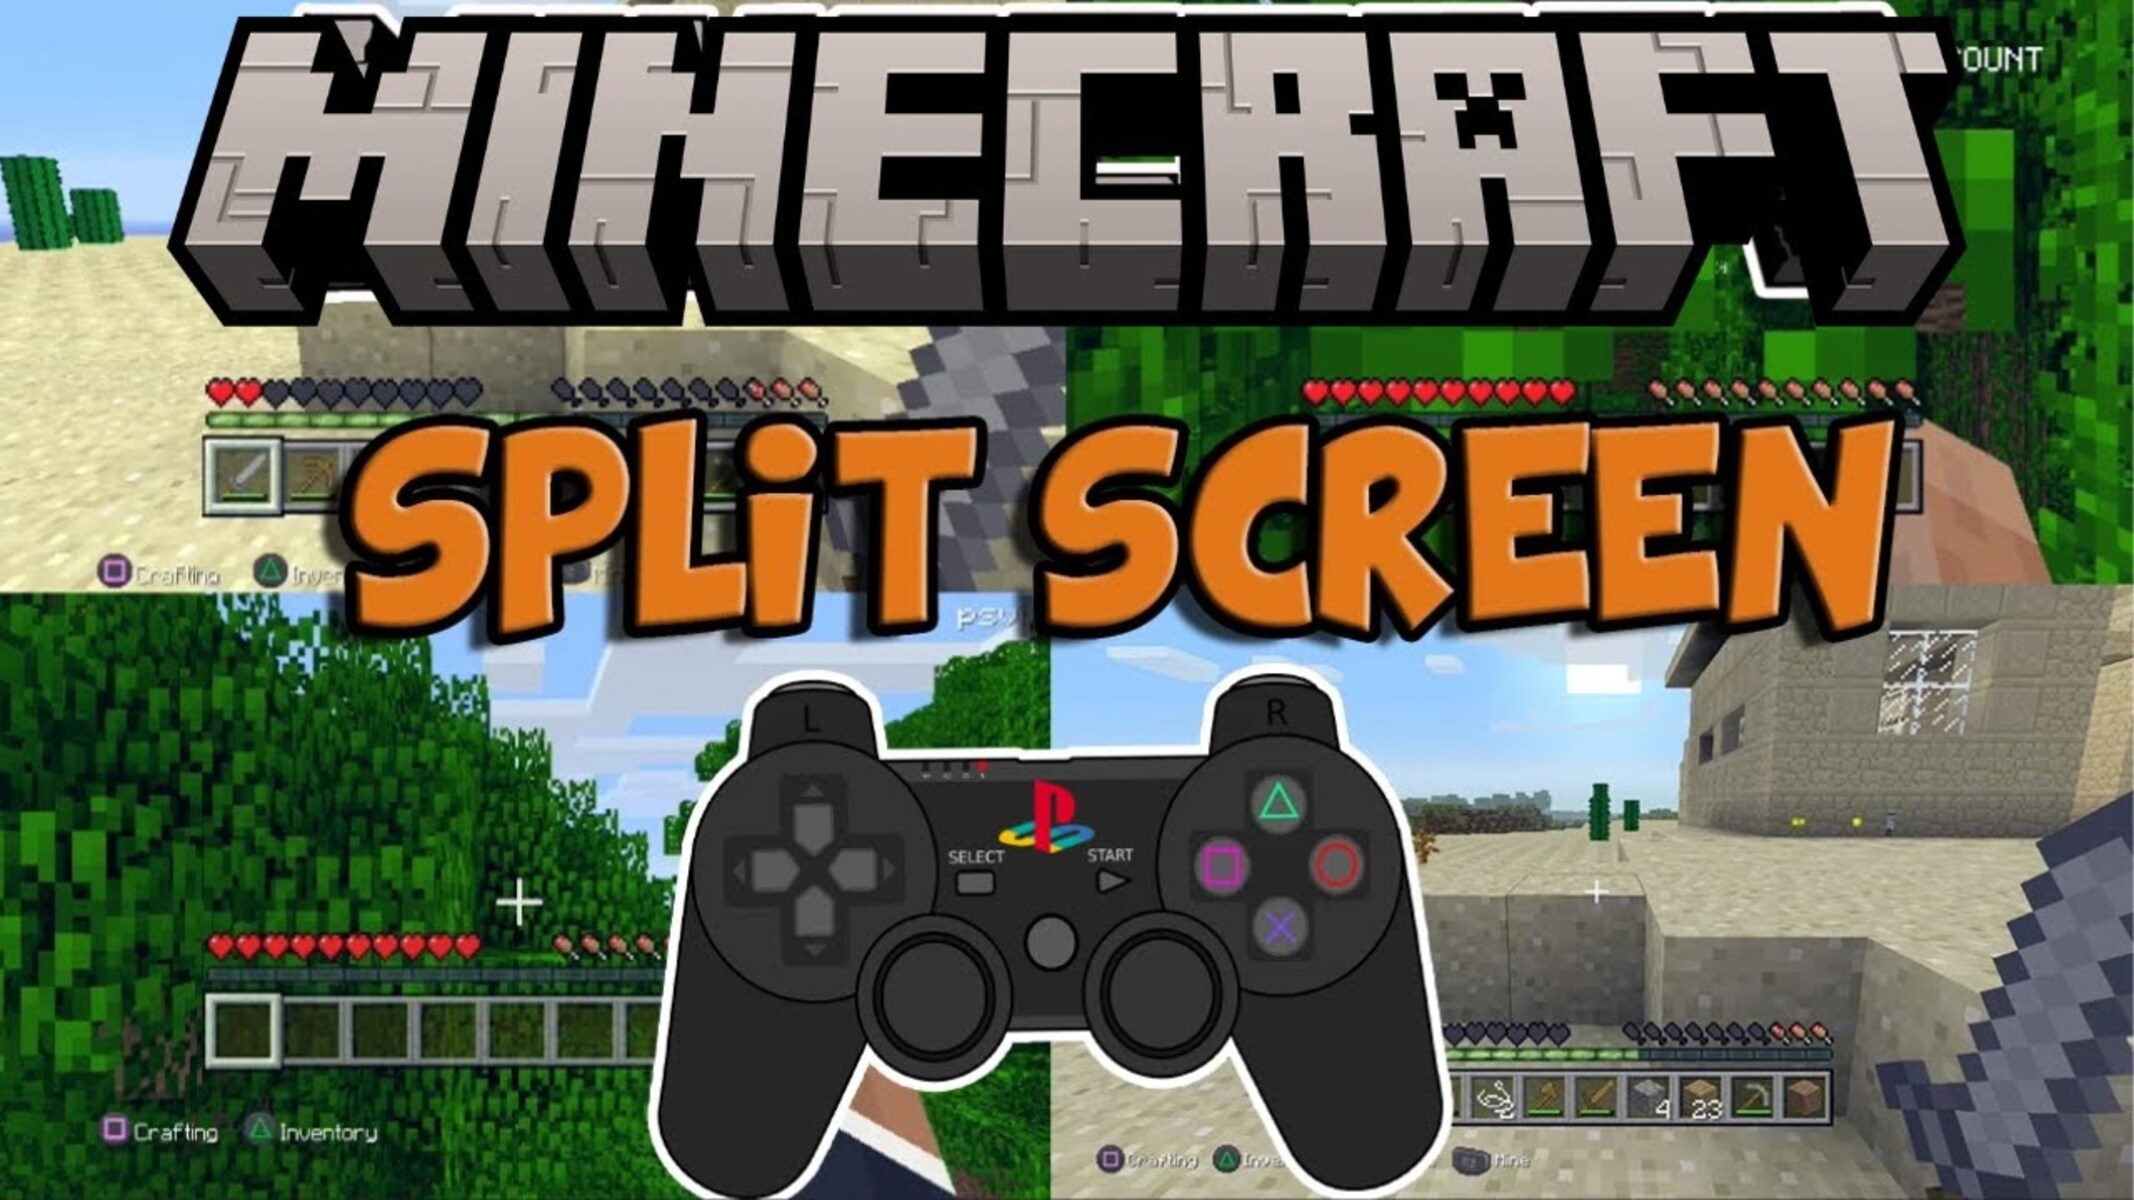 How To Play Splitscreen On Minecraft Xbox 360 Without HDMI